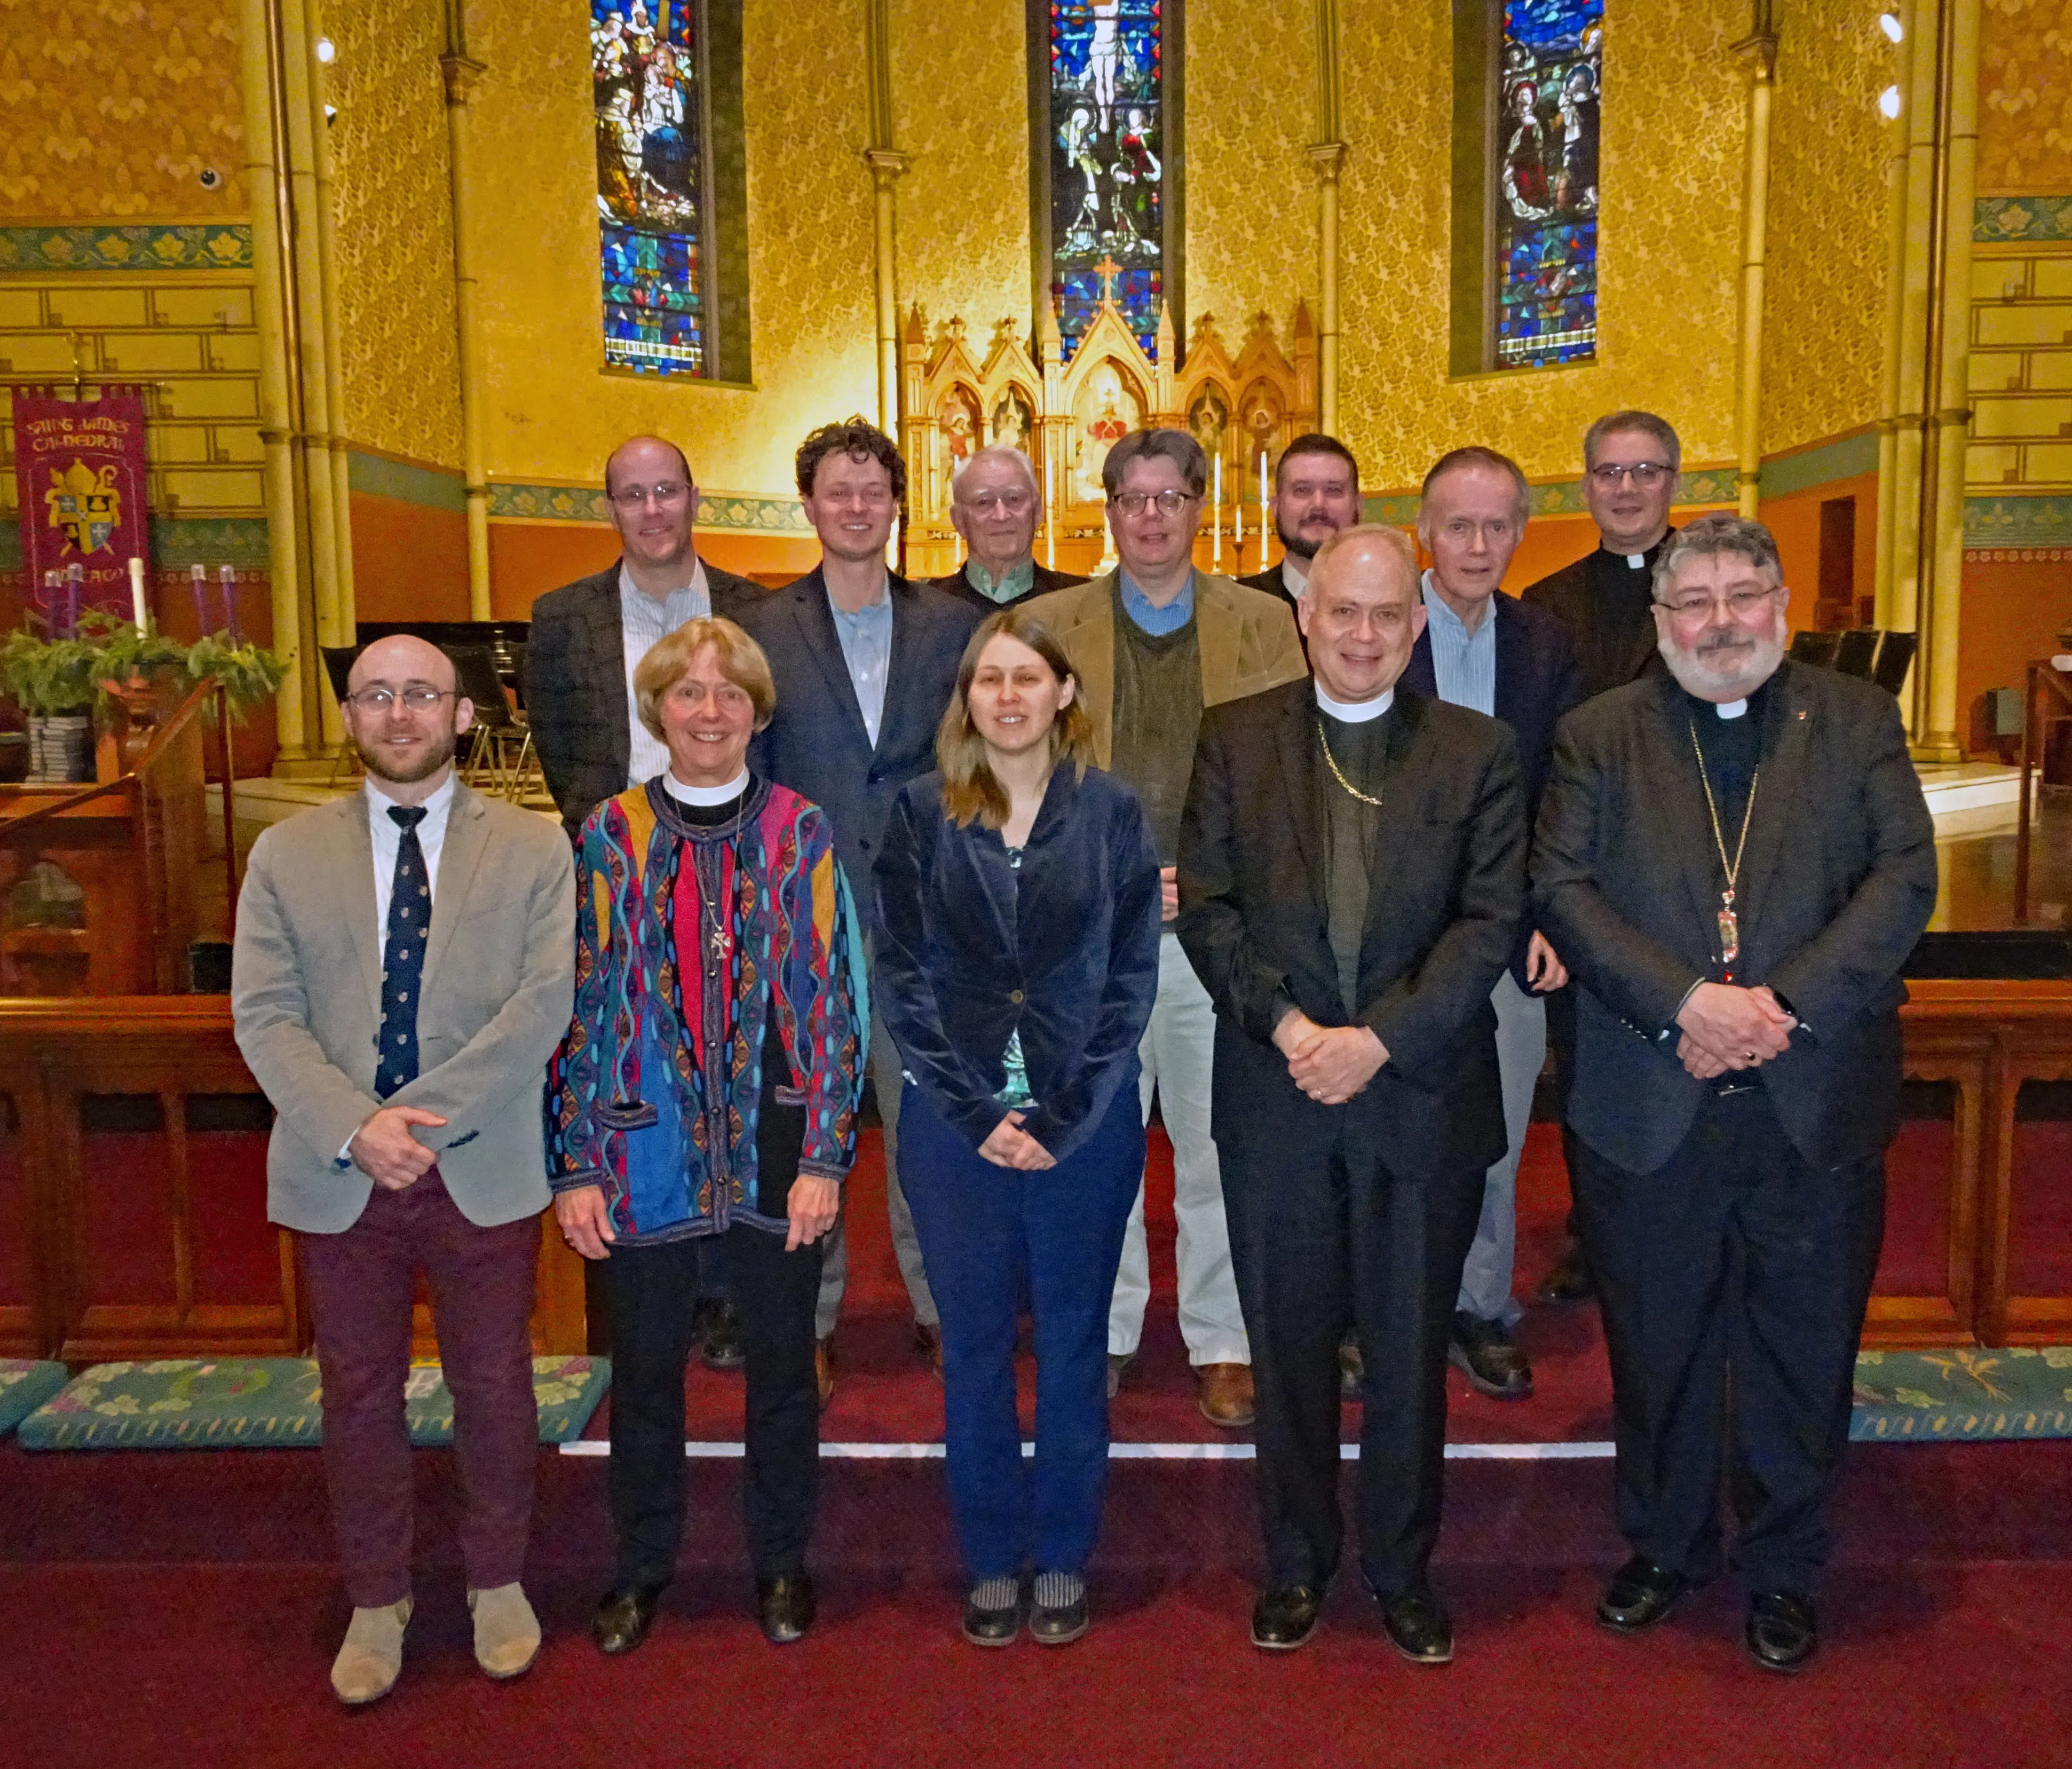 Members of the Anglican-Roman Catholic Theological Consultation at their meeting in Chicago